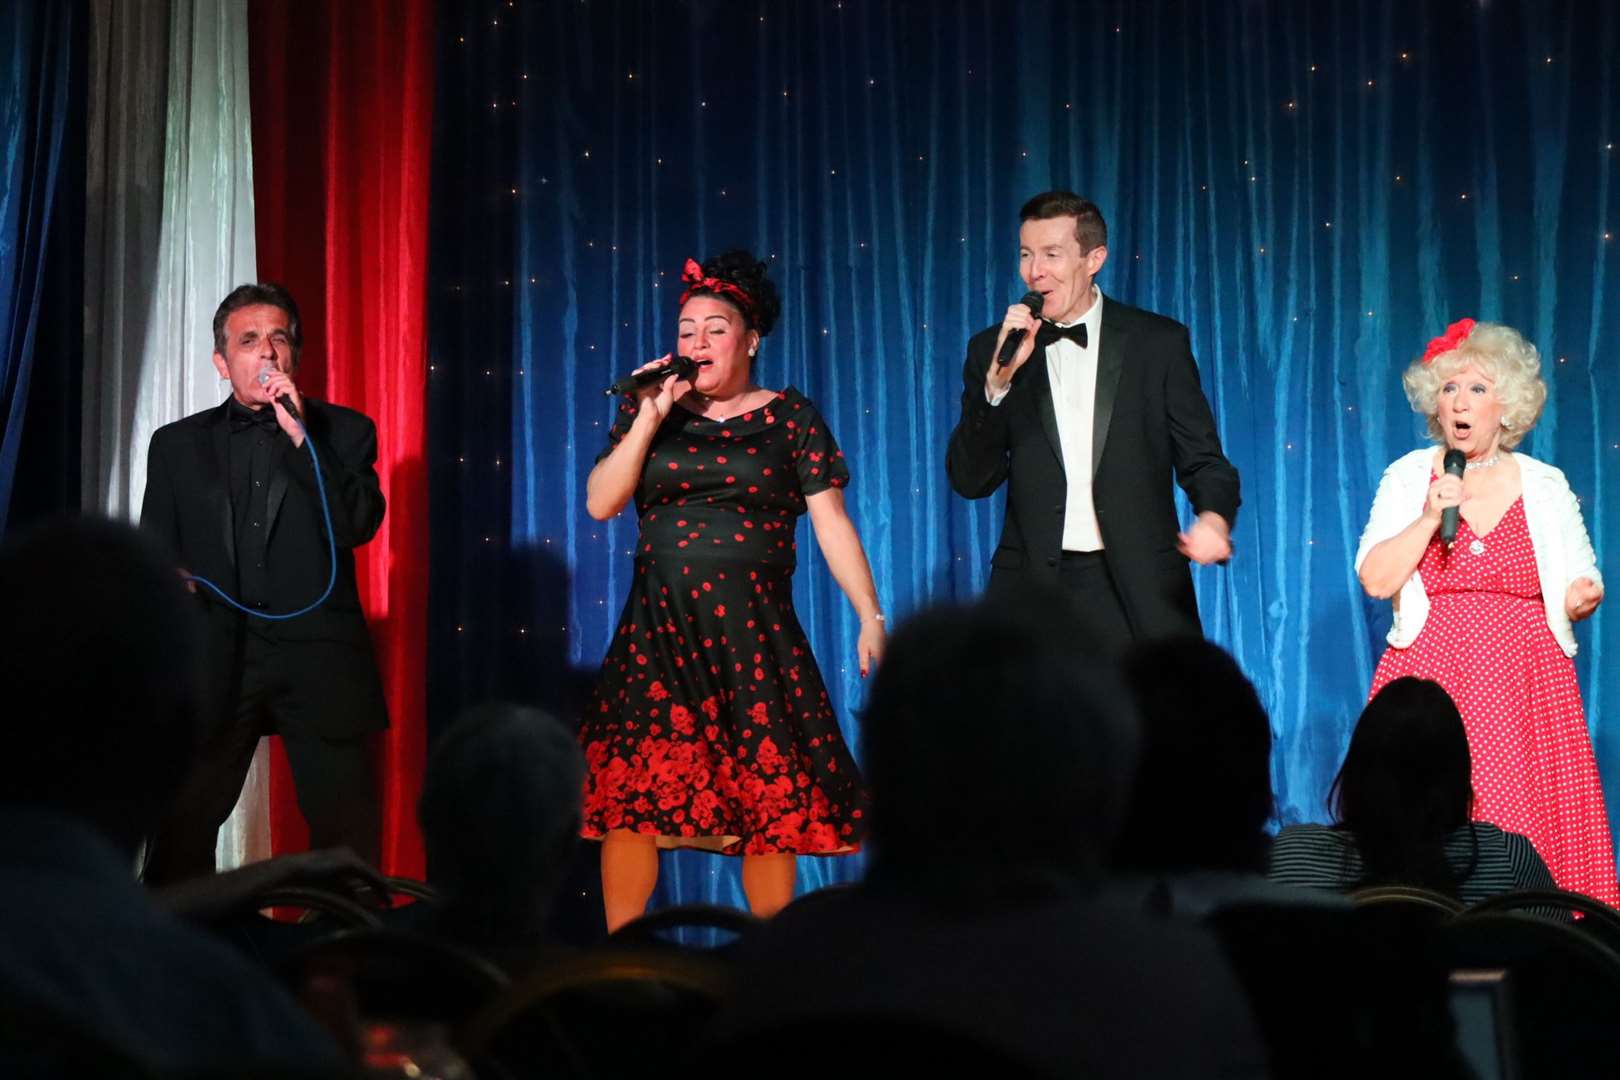 Mike Marandi, Annie Riley, Lloyd Ellery and Kate Carman in Oh Boy! at the Criterion Theatre, Blue Town, Sheerness